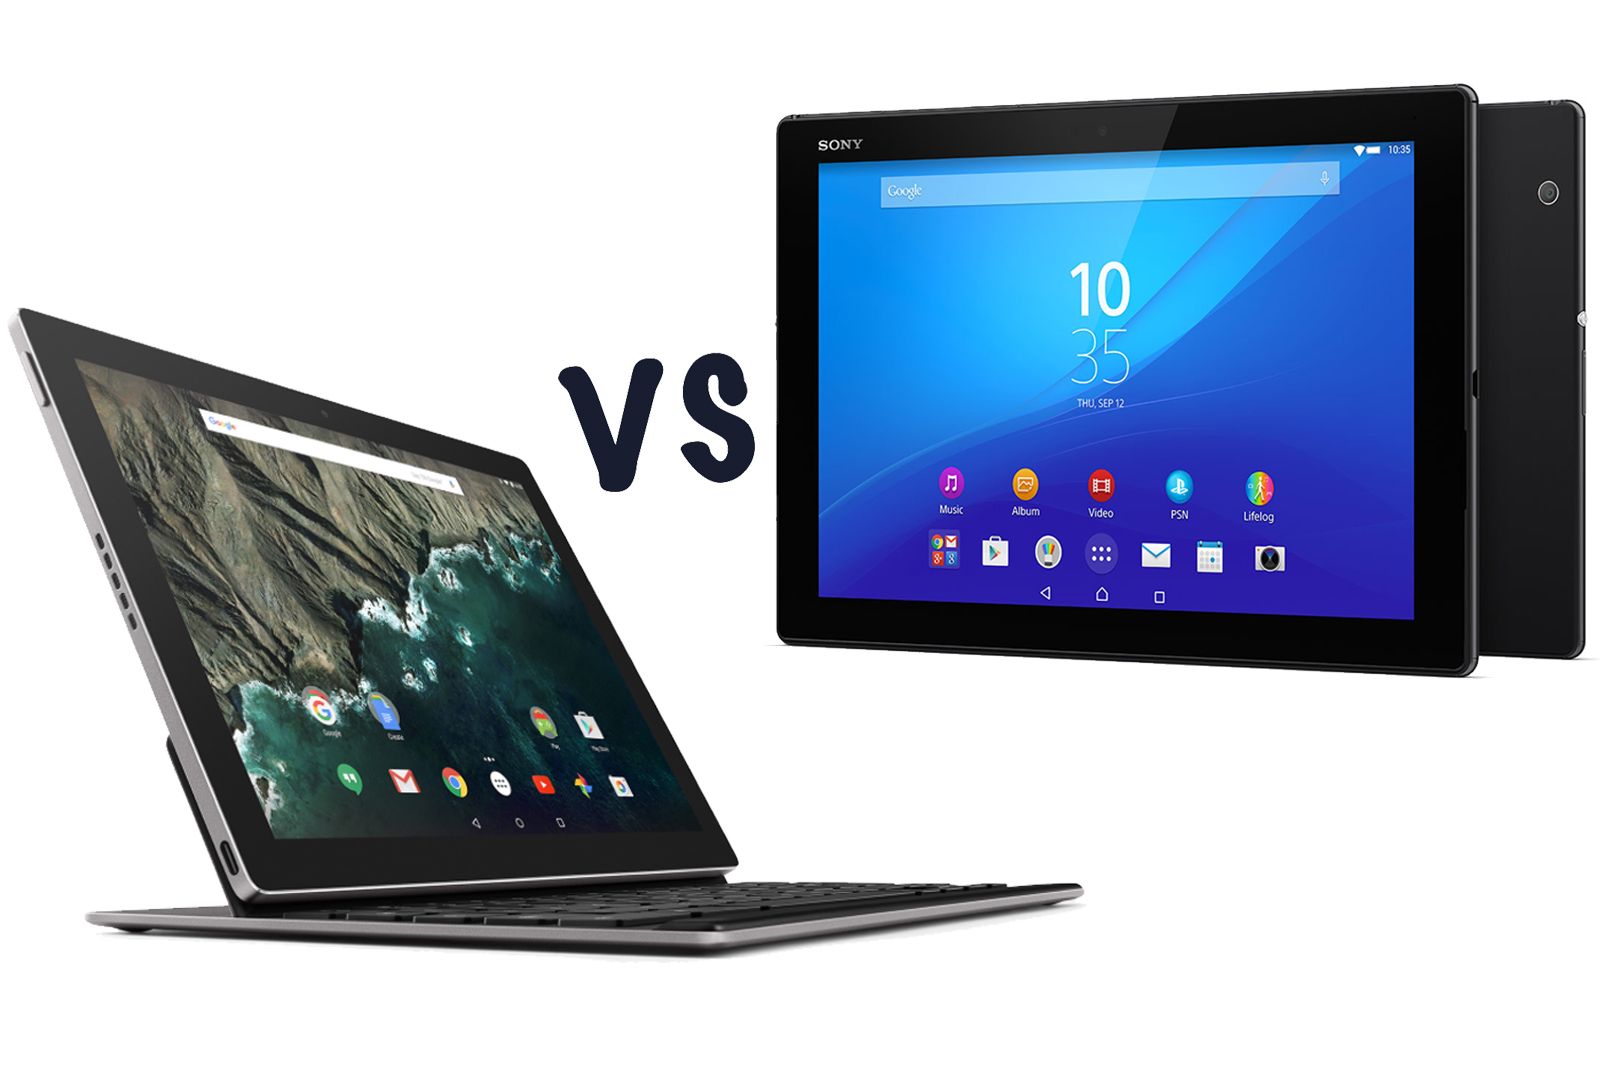 google pixel c vs sony xperia z4 tablet what s the difference  image 1